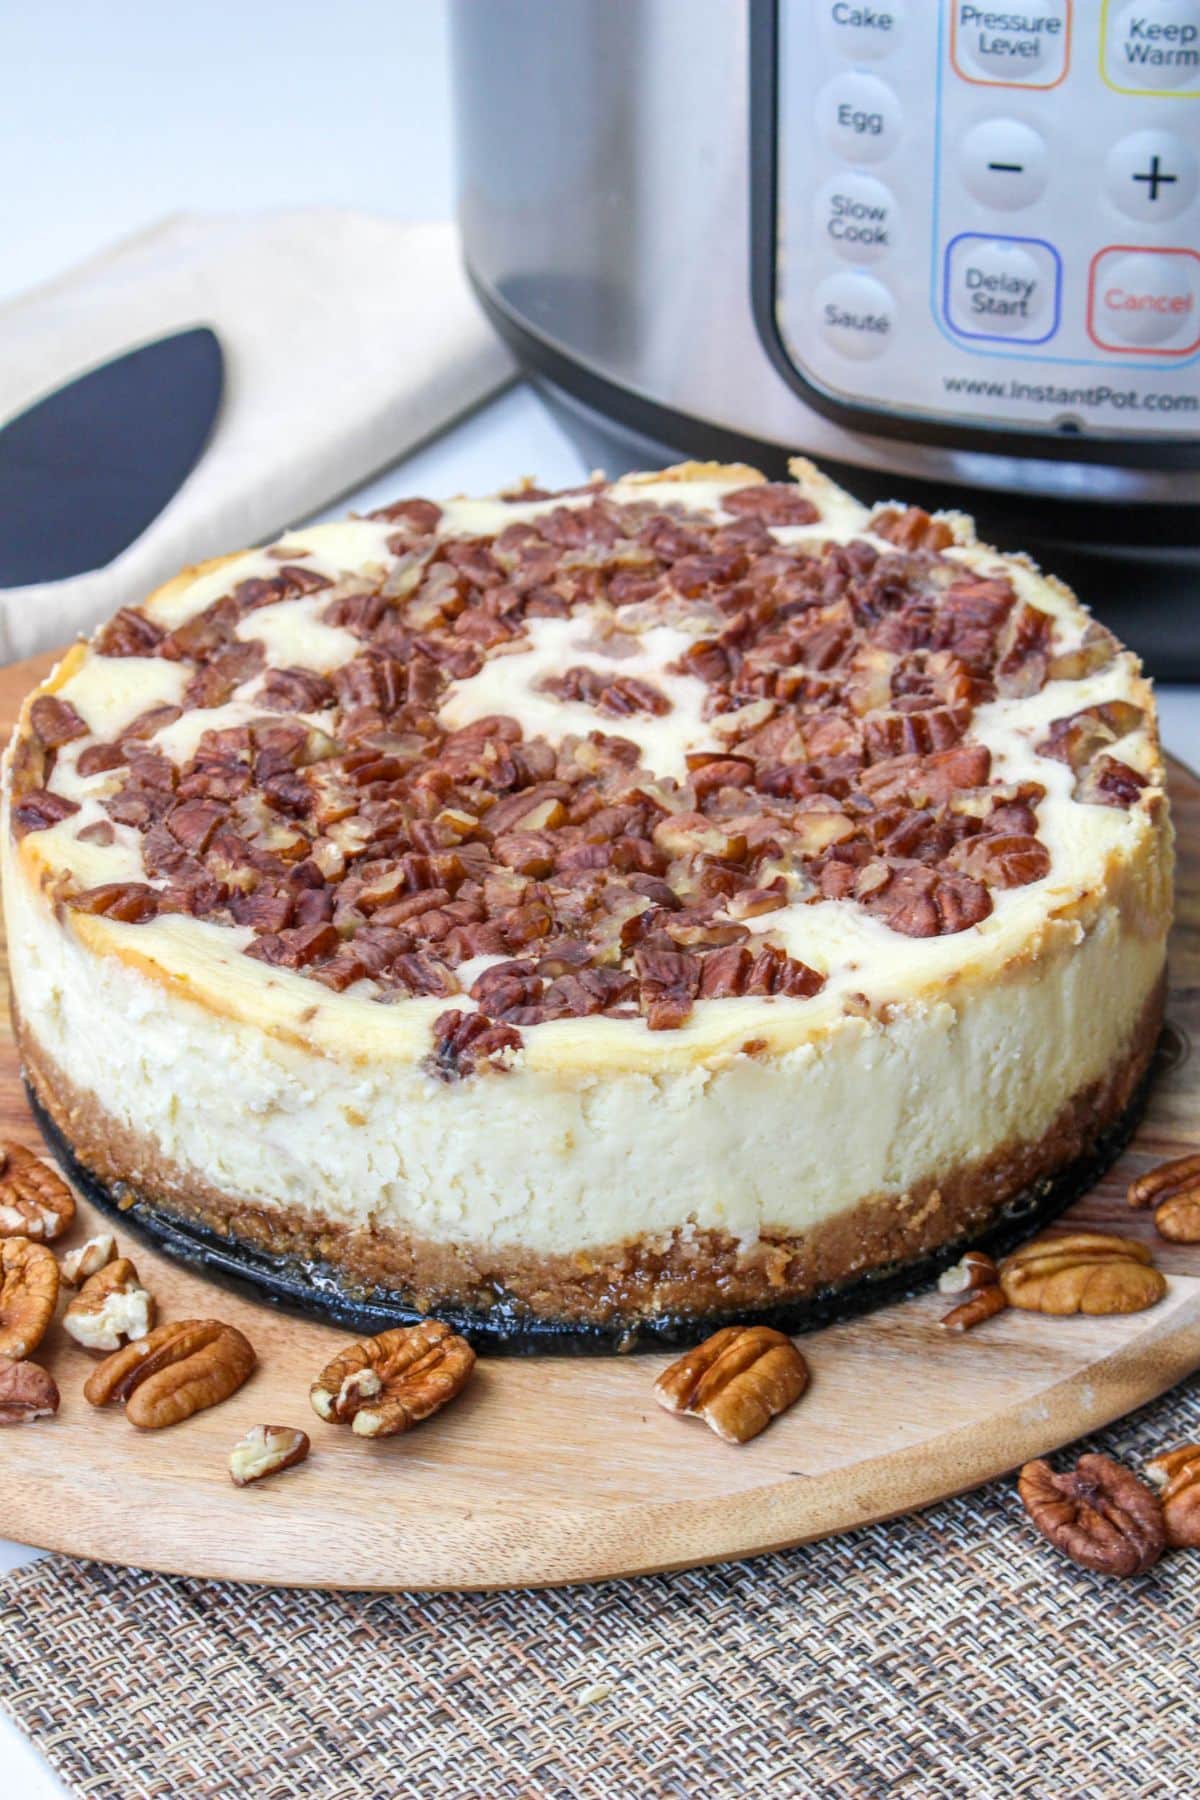 whole pecan pie cheesecake on a wooden cutting board